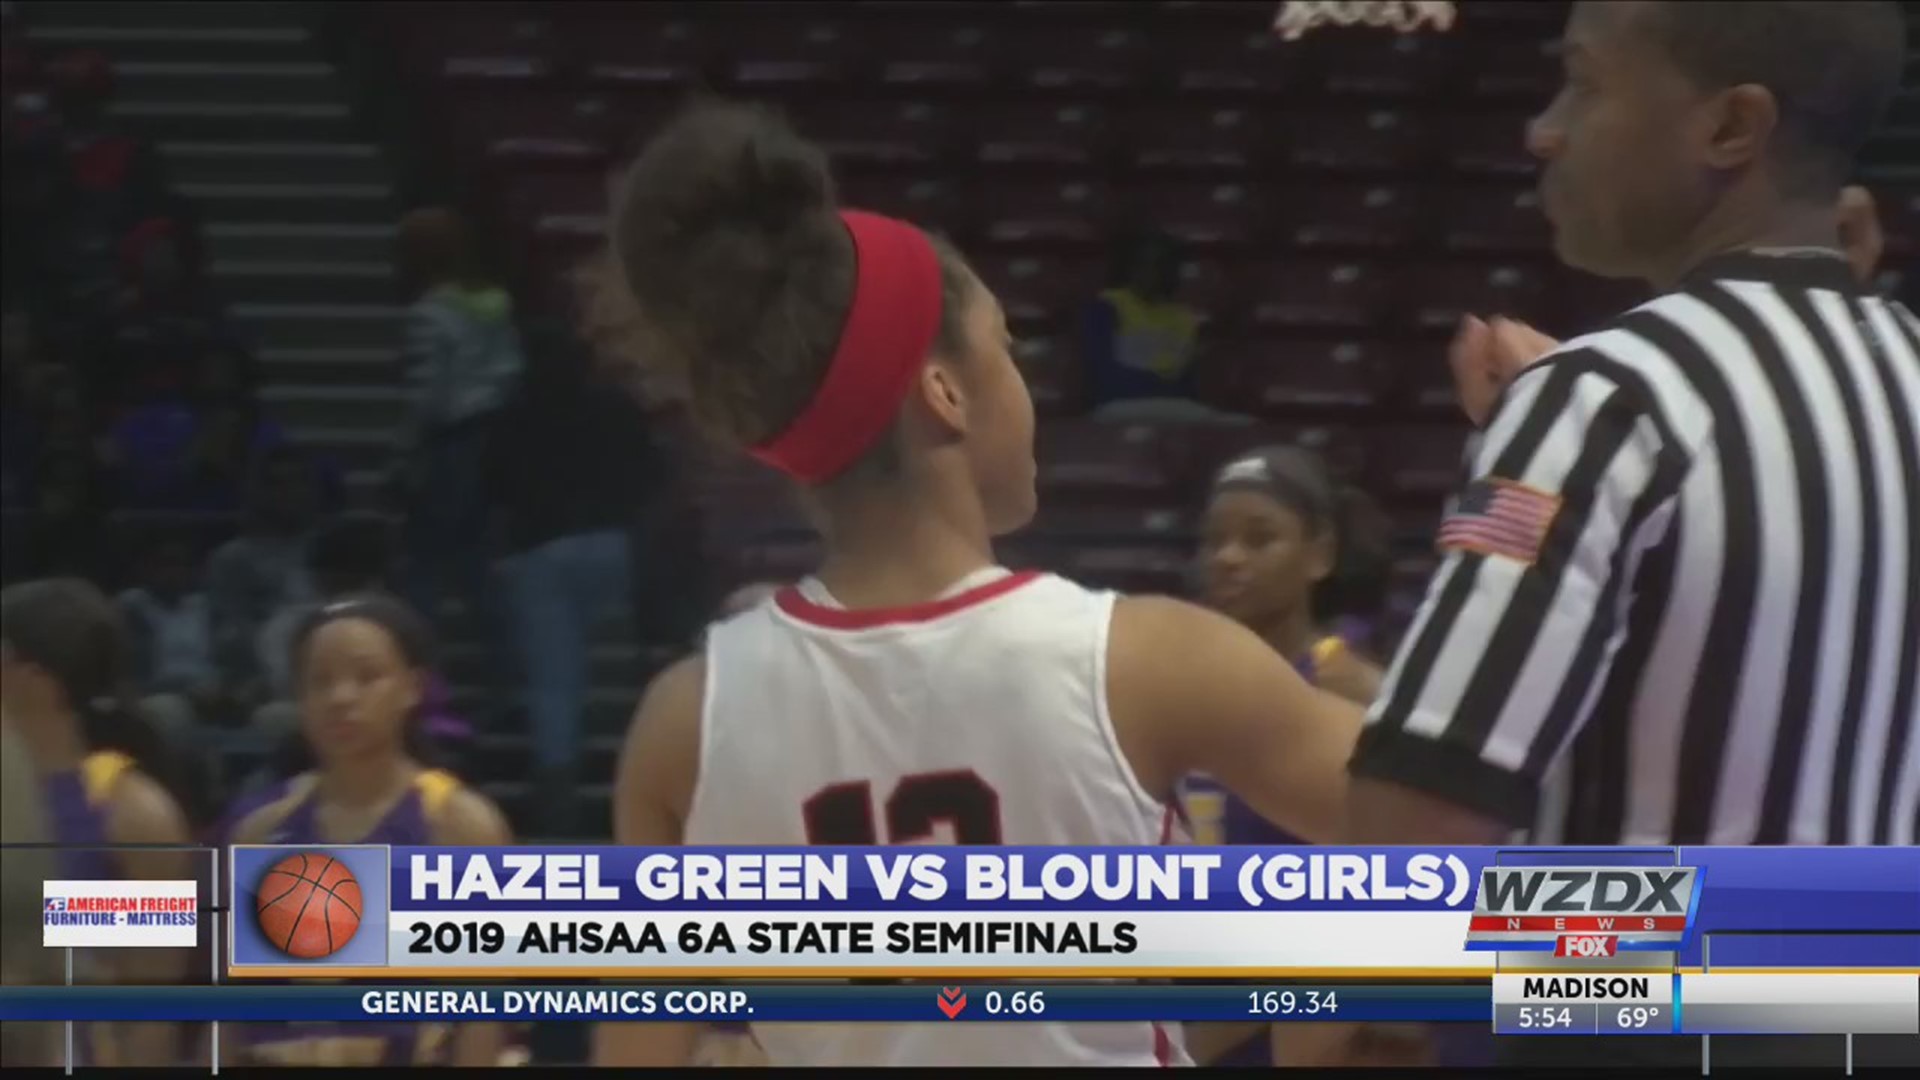 Coach Tim Miller and the Hazel Green Lady Trojans are heading back to the Class 6A state championship after defeating Blount today in the 6a semifinals.